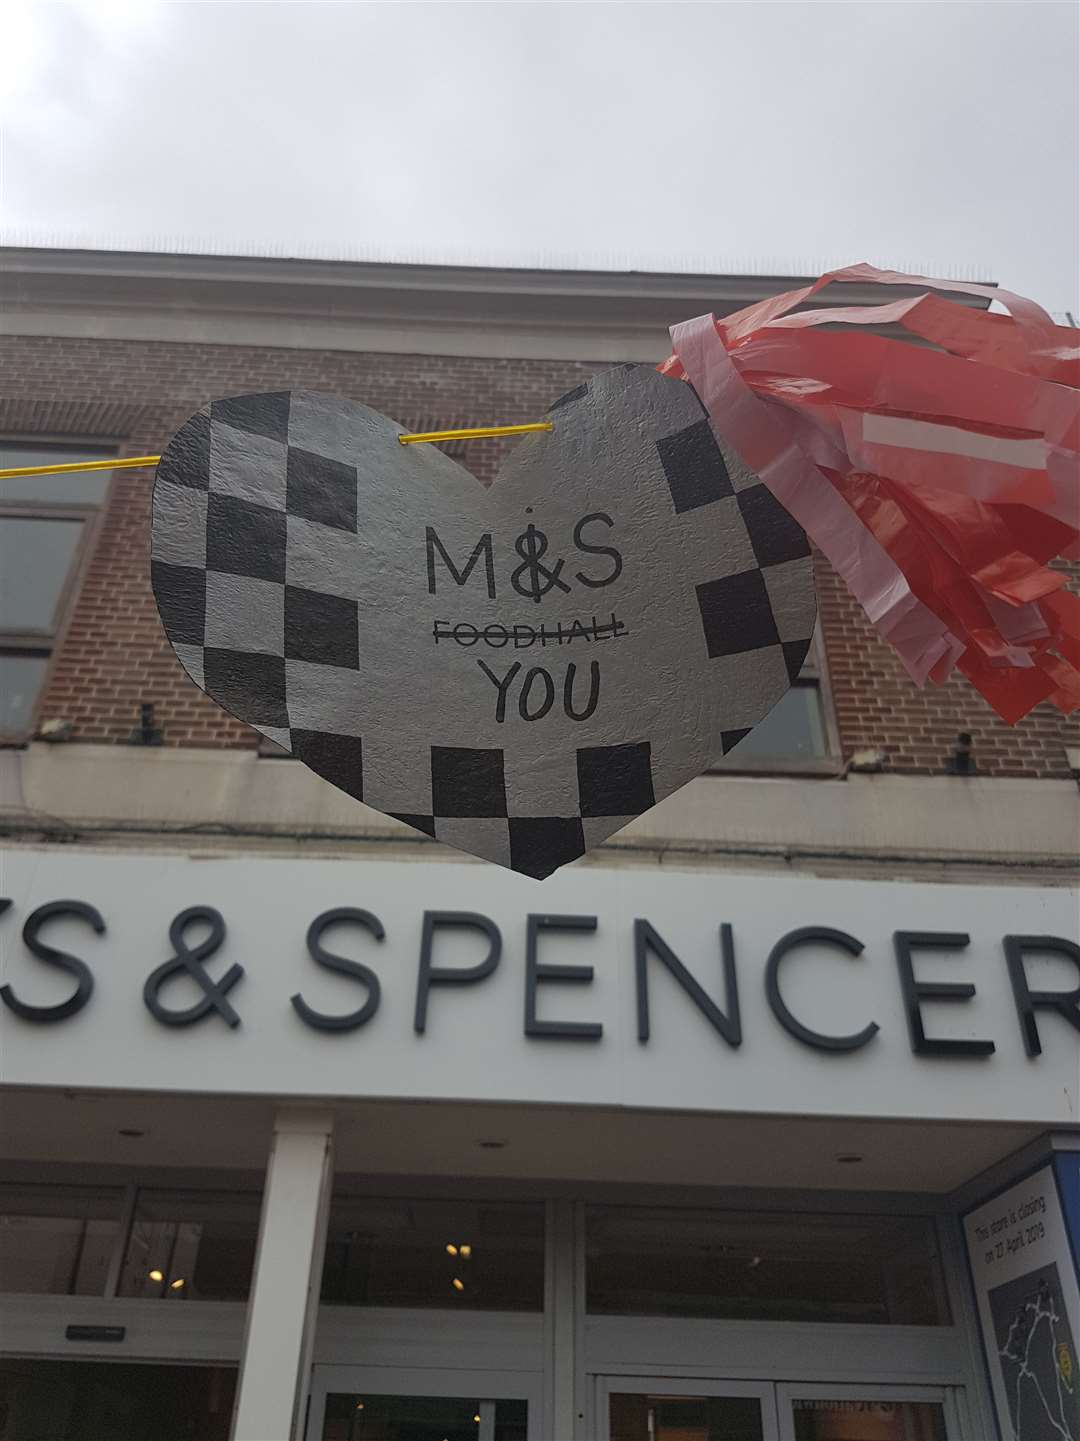 Bunting was put out the front, with its usual M&S Foodhall message replaced with "MiS you"